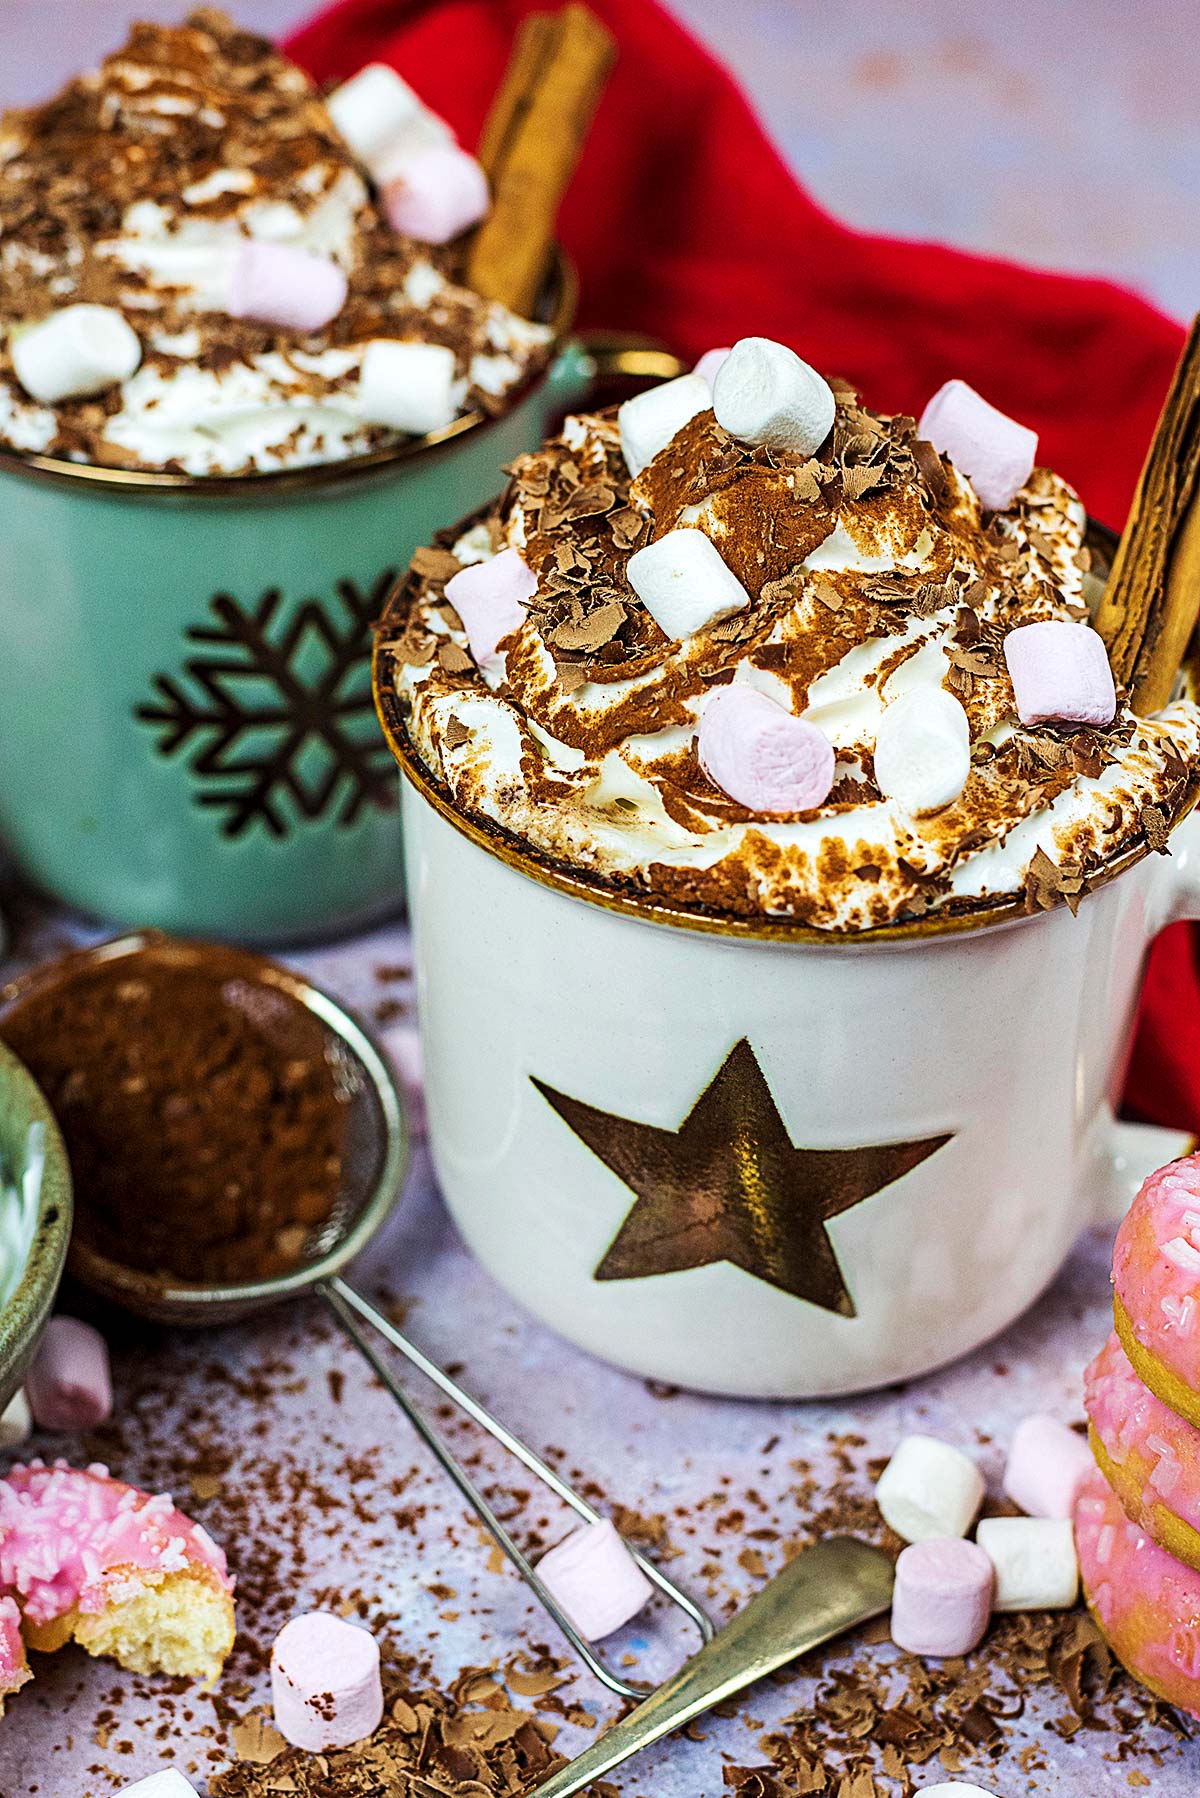 Two festive mugs topped with whipped cream, marshmallows and chocolate shavings.